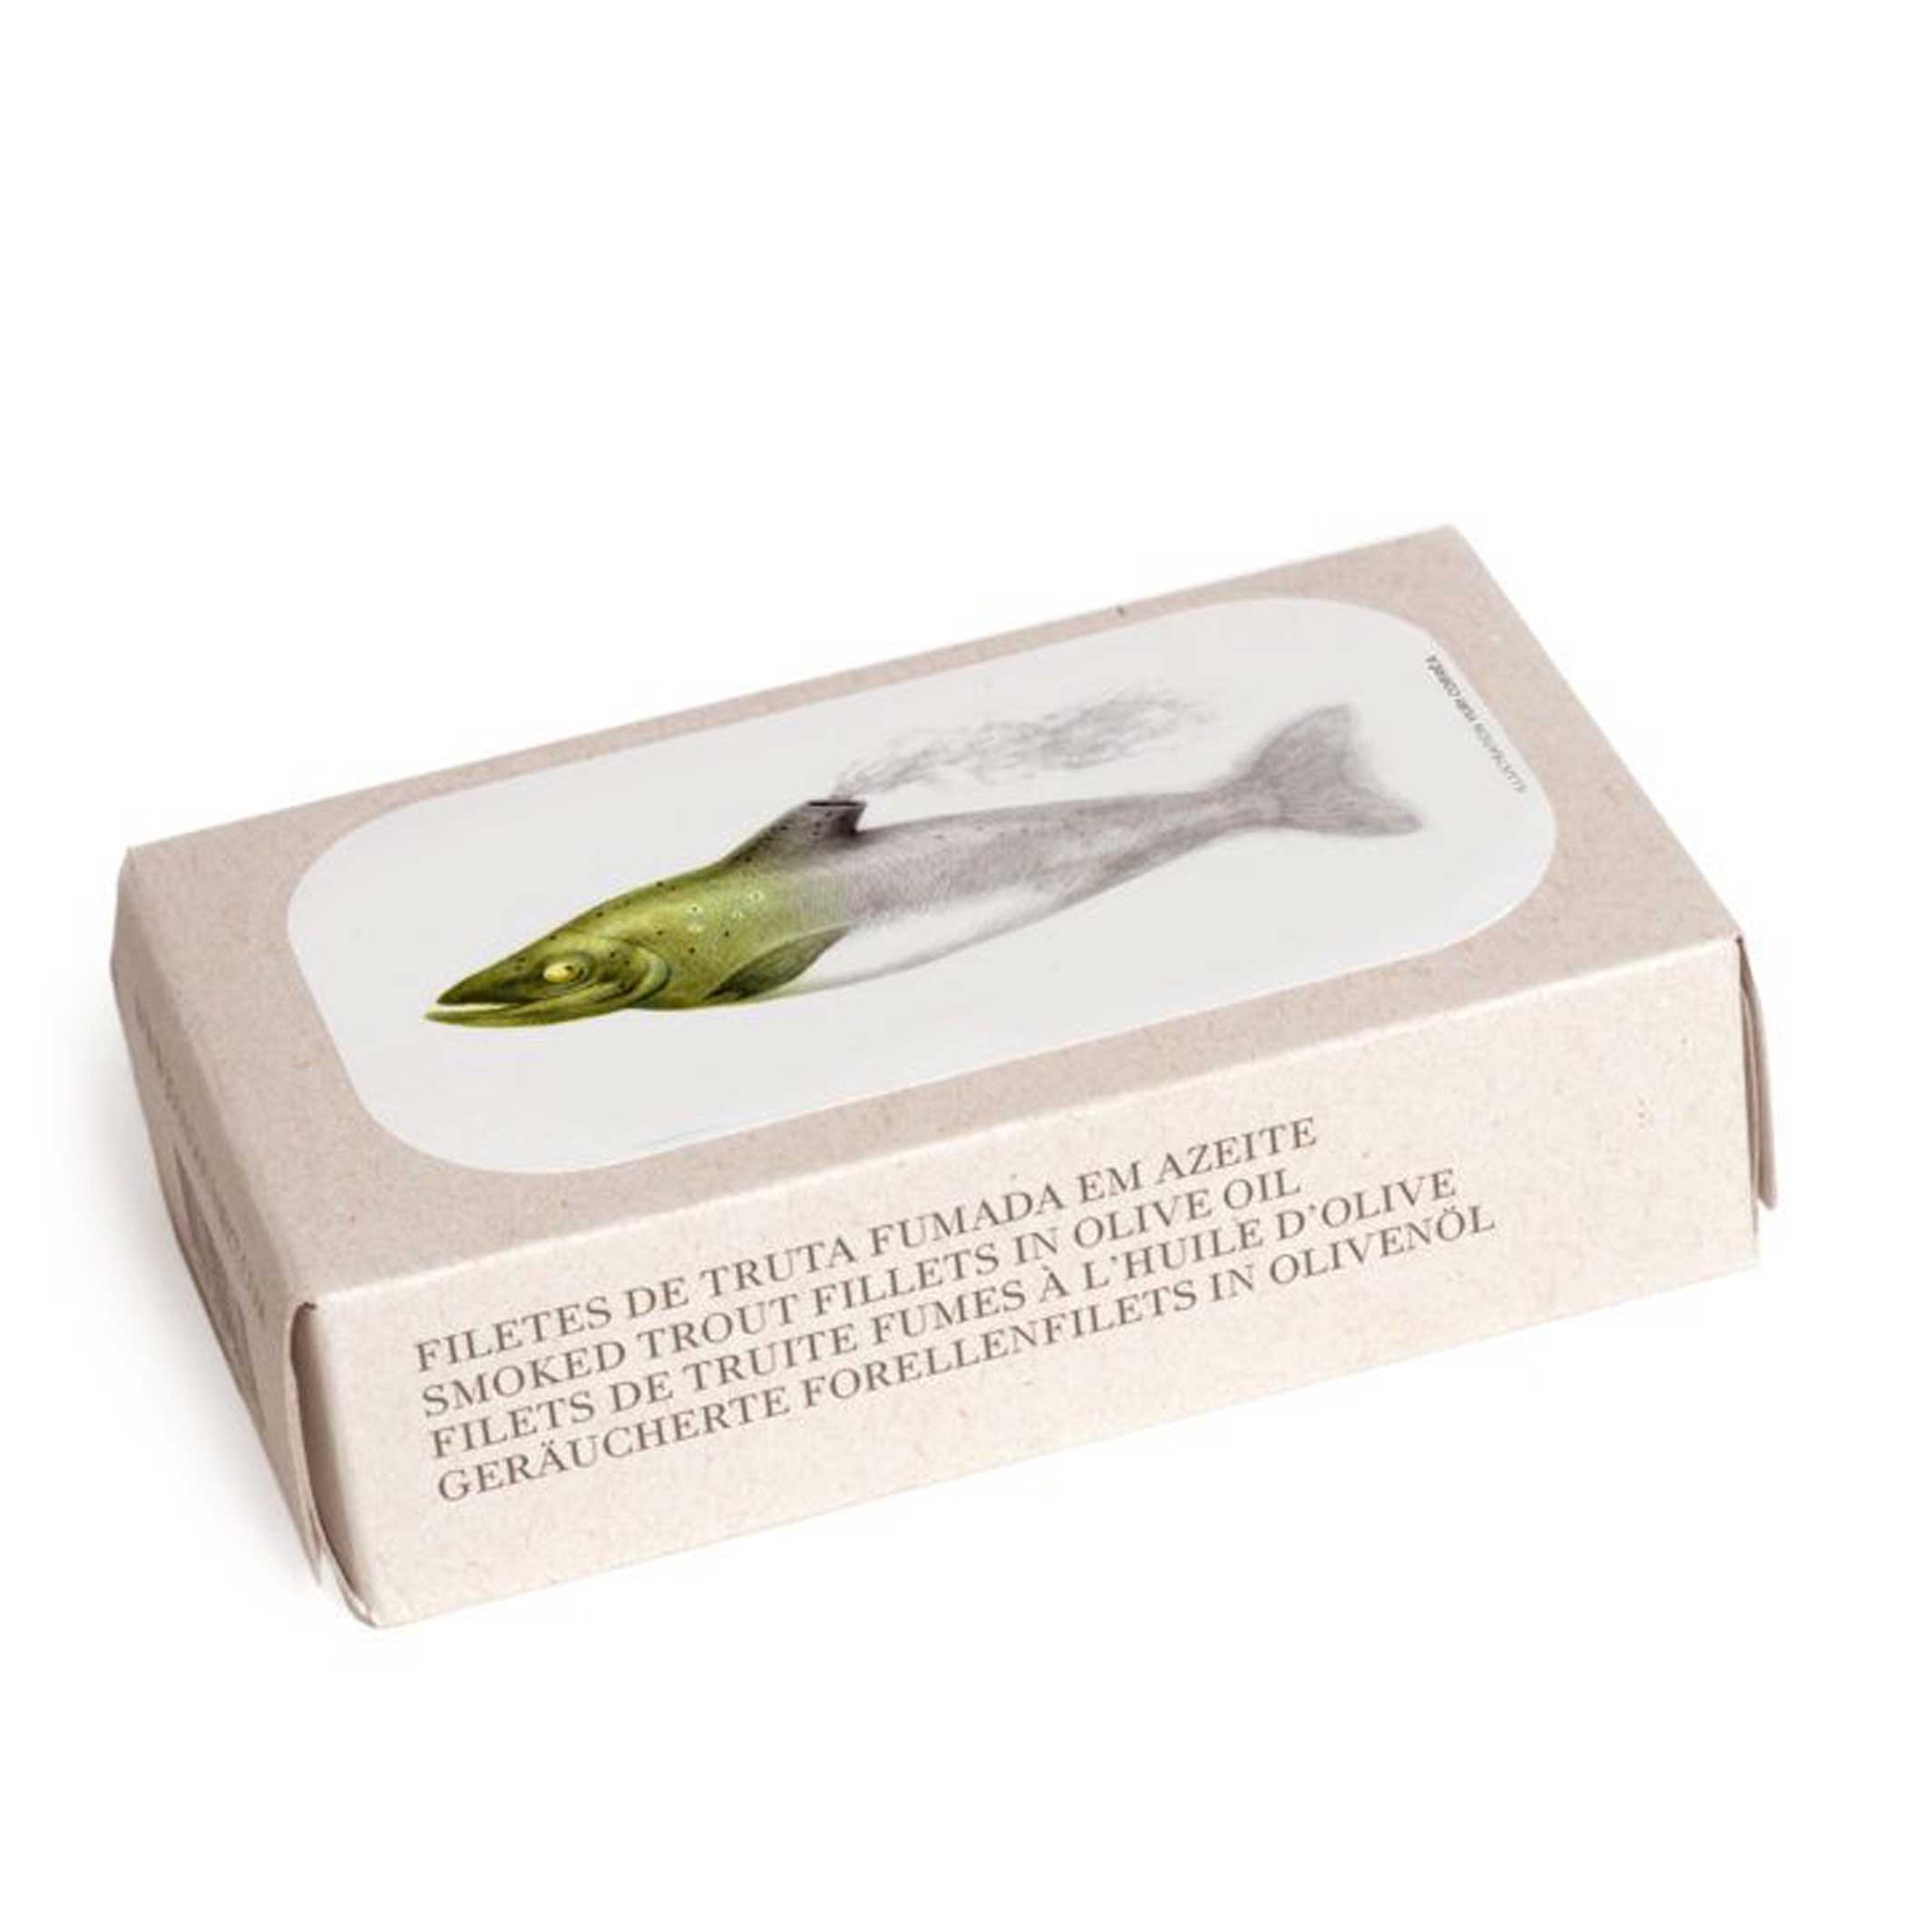 Smoked TROUT FILLETS in Olive Oil | CANNED GOURMET FISH | 90 g | José Gourmet